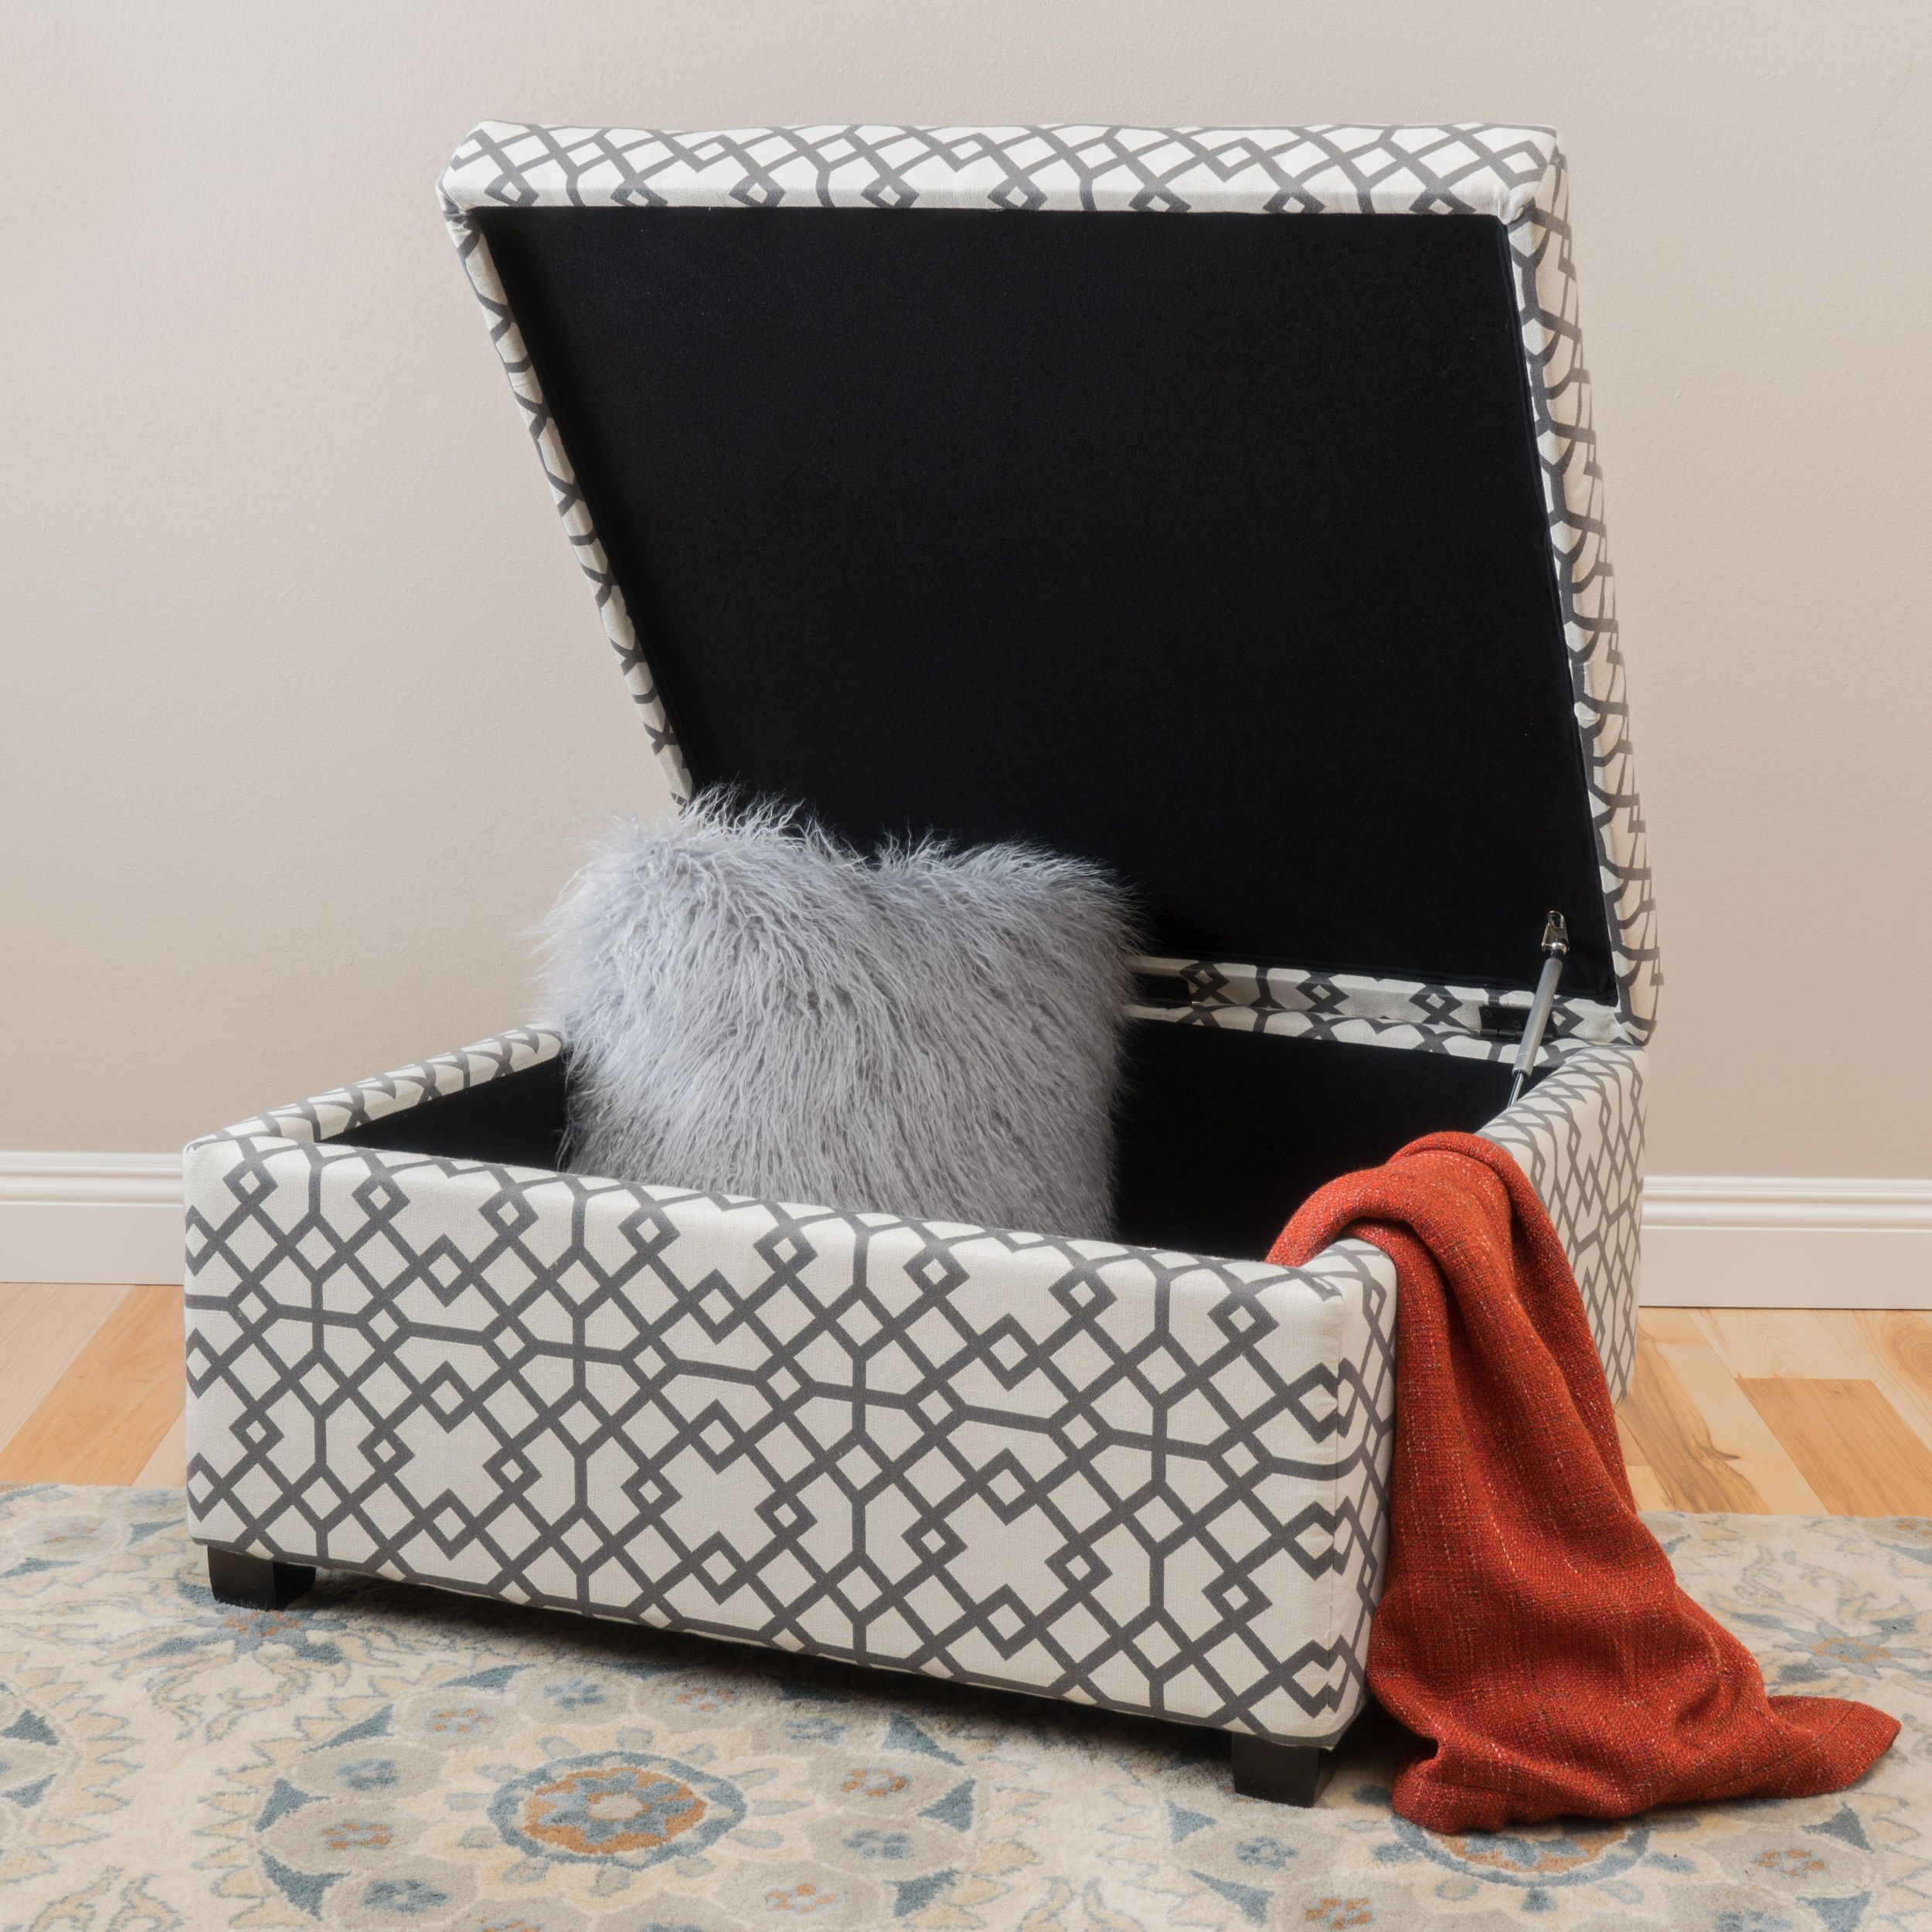 Noble House Bessley Patterned Fabric Storage Ottoman, Grey Geometric Within Recent Brushed Geometric Pattern Ottomans (View 6 of 10)